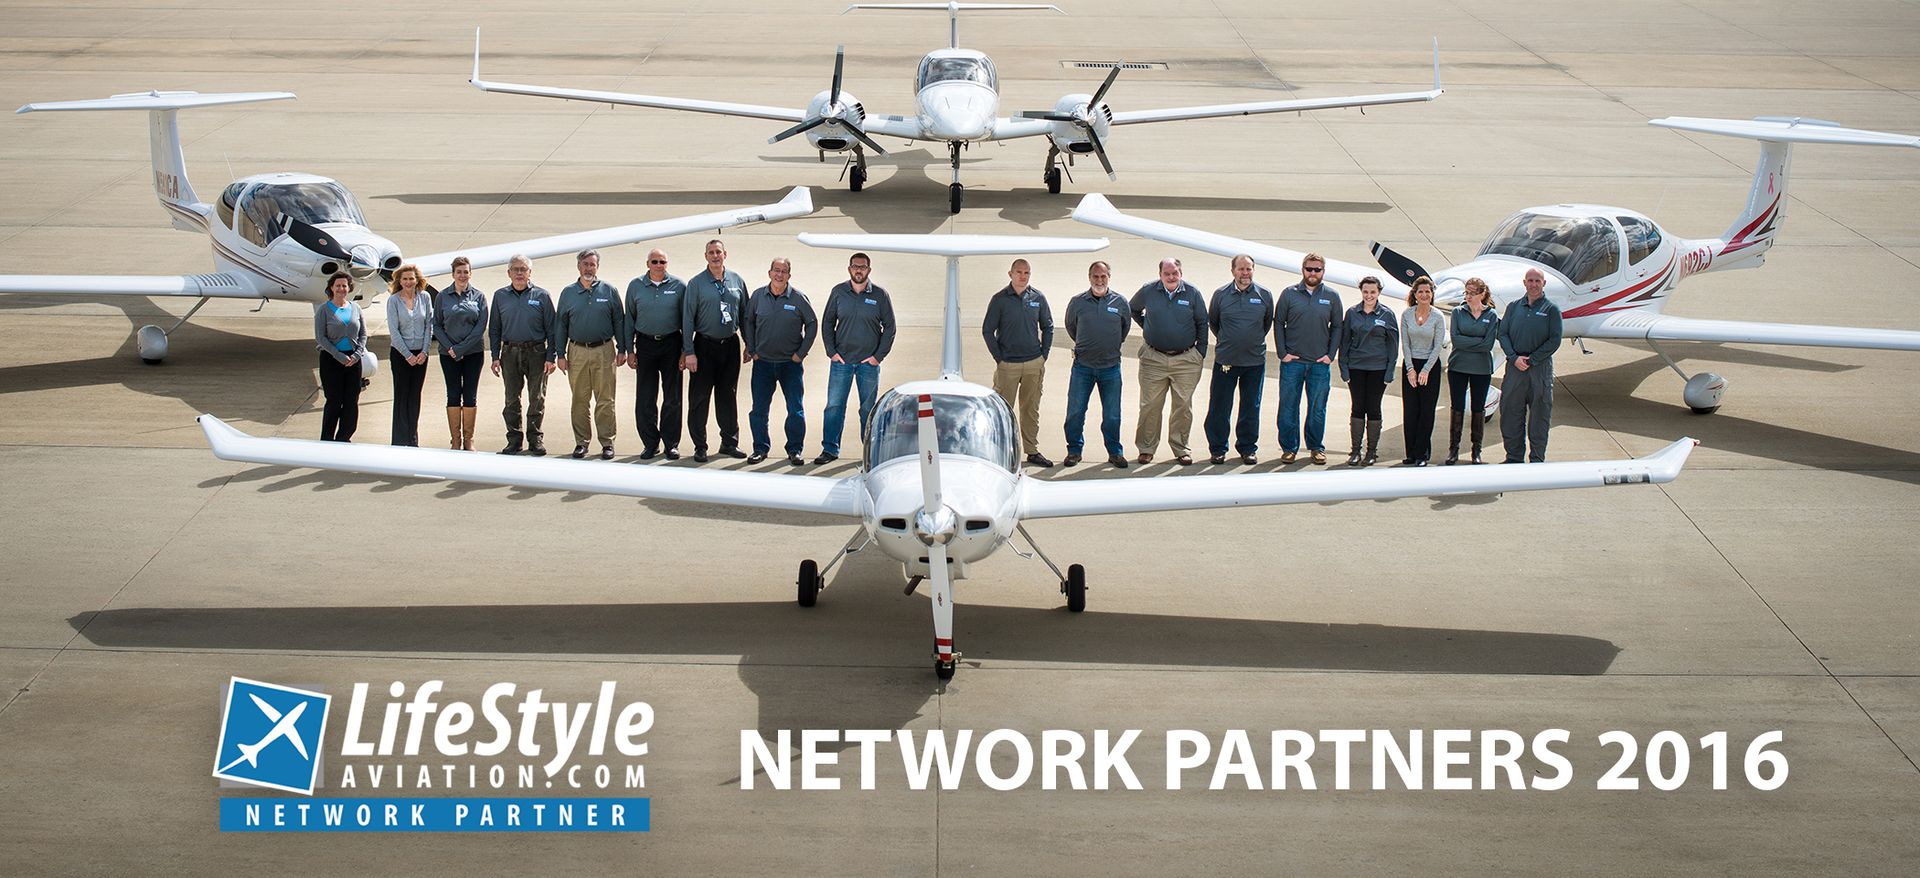 LifeStyle Aviation Network Council Event 2016